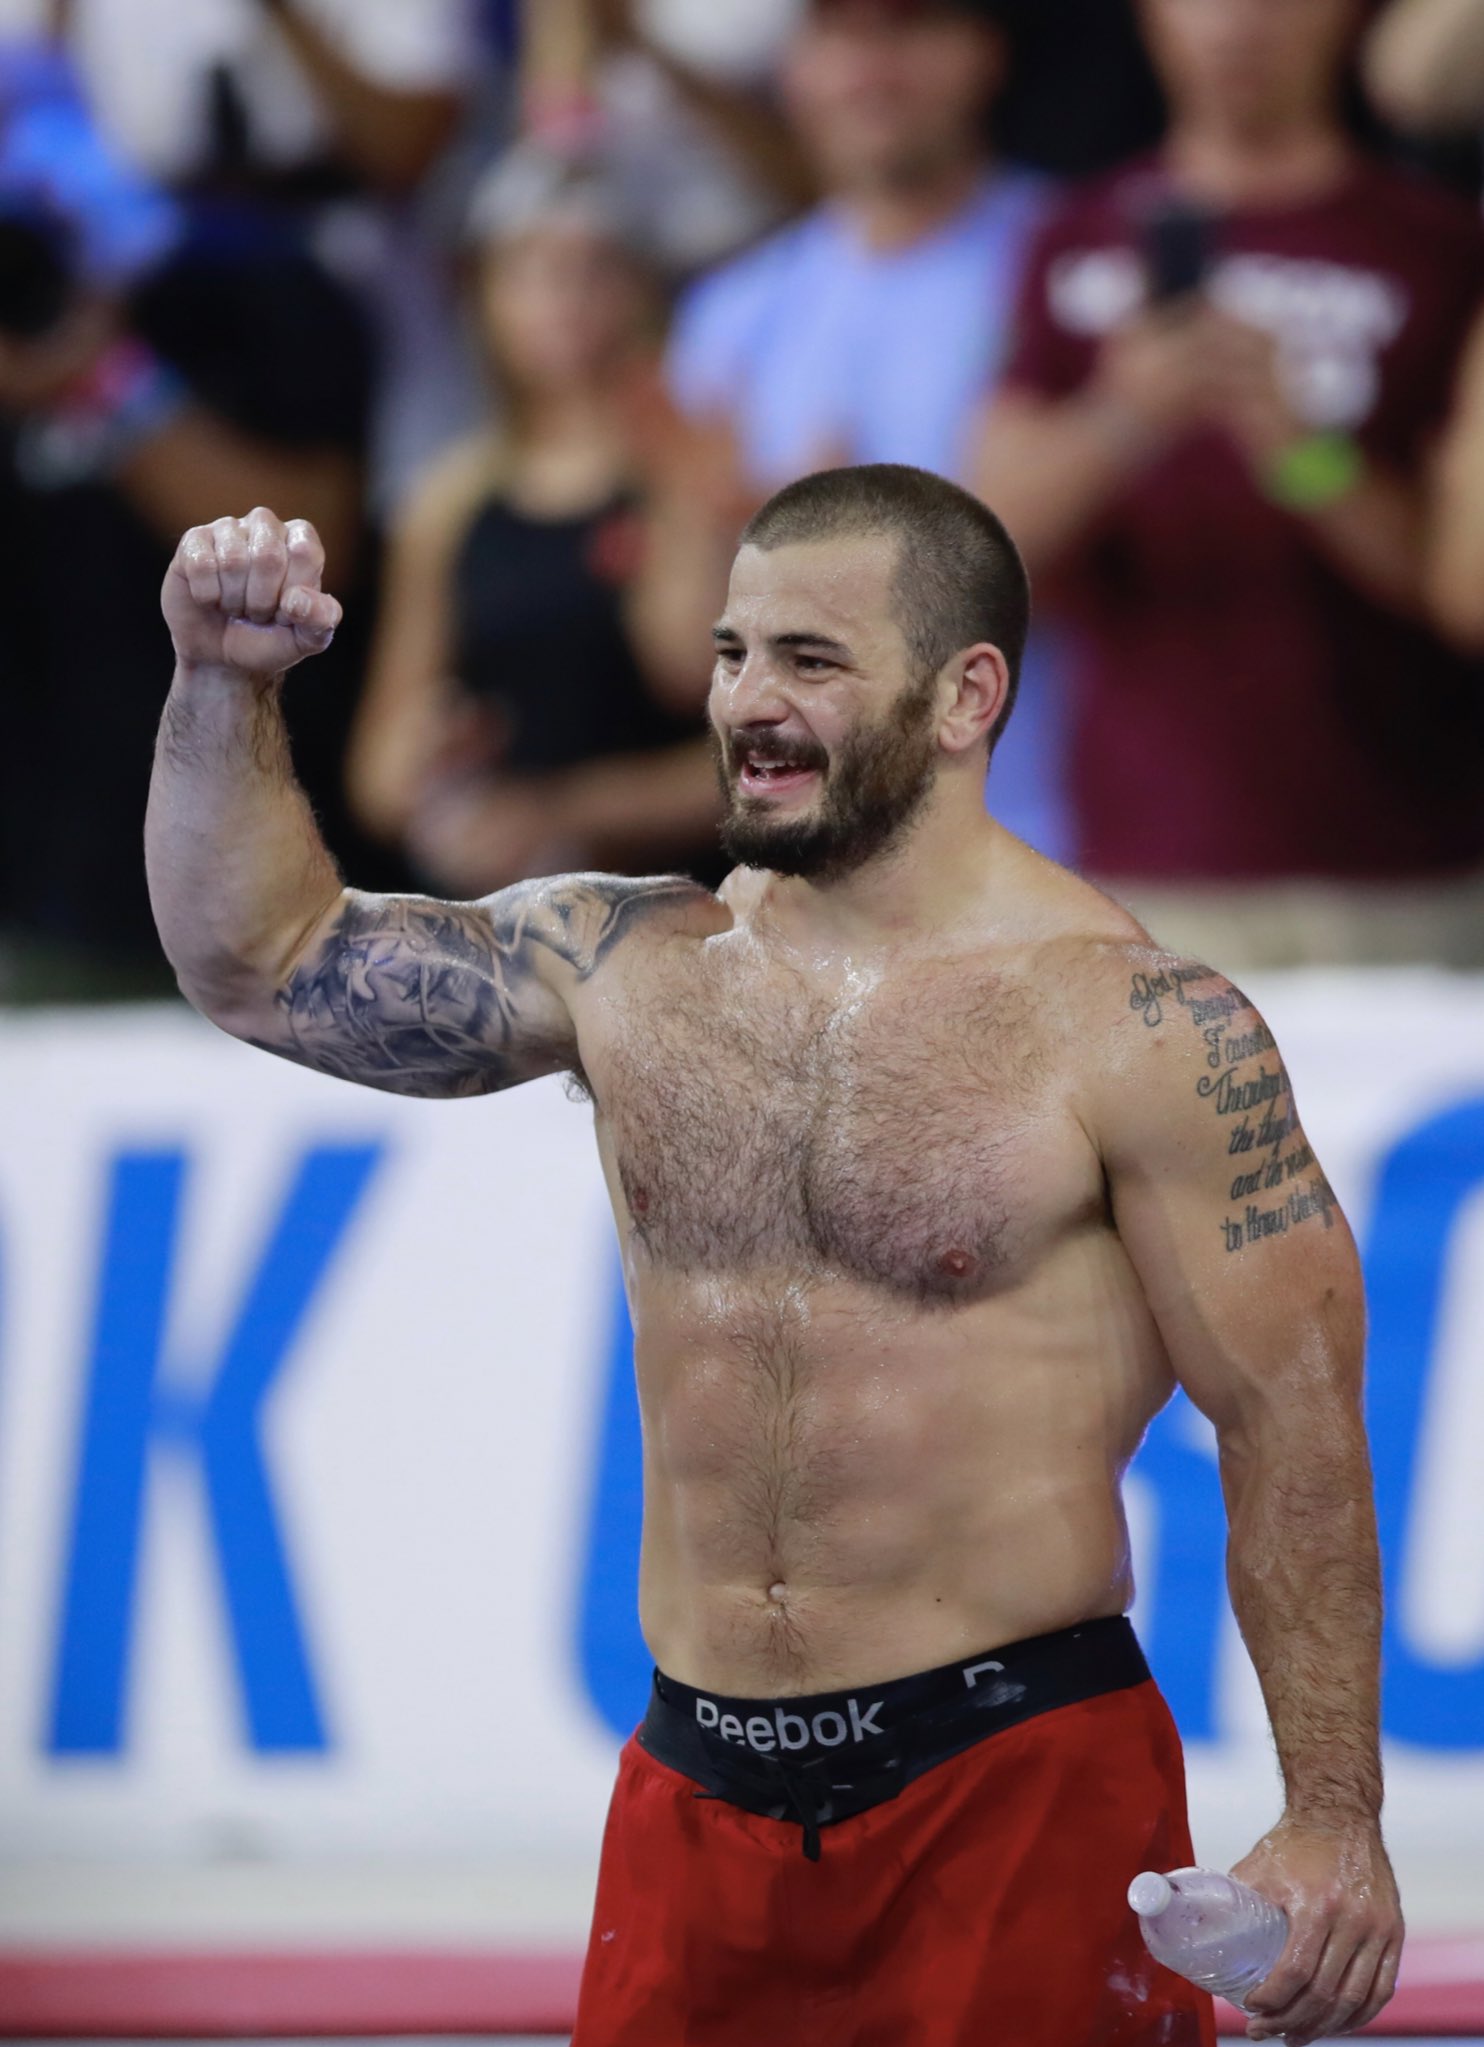 The CrossFit Games on Twitter: "He was challenged, and for the consecutive time, he rose above all. @MathewFras the 2019 Reebok CrossFit Games Champion. https://t.co/QMnpHAiCyI" / Twitter